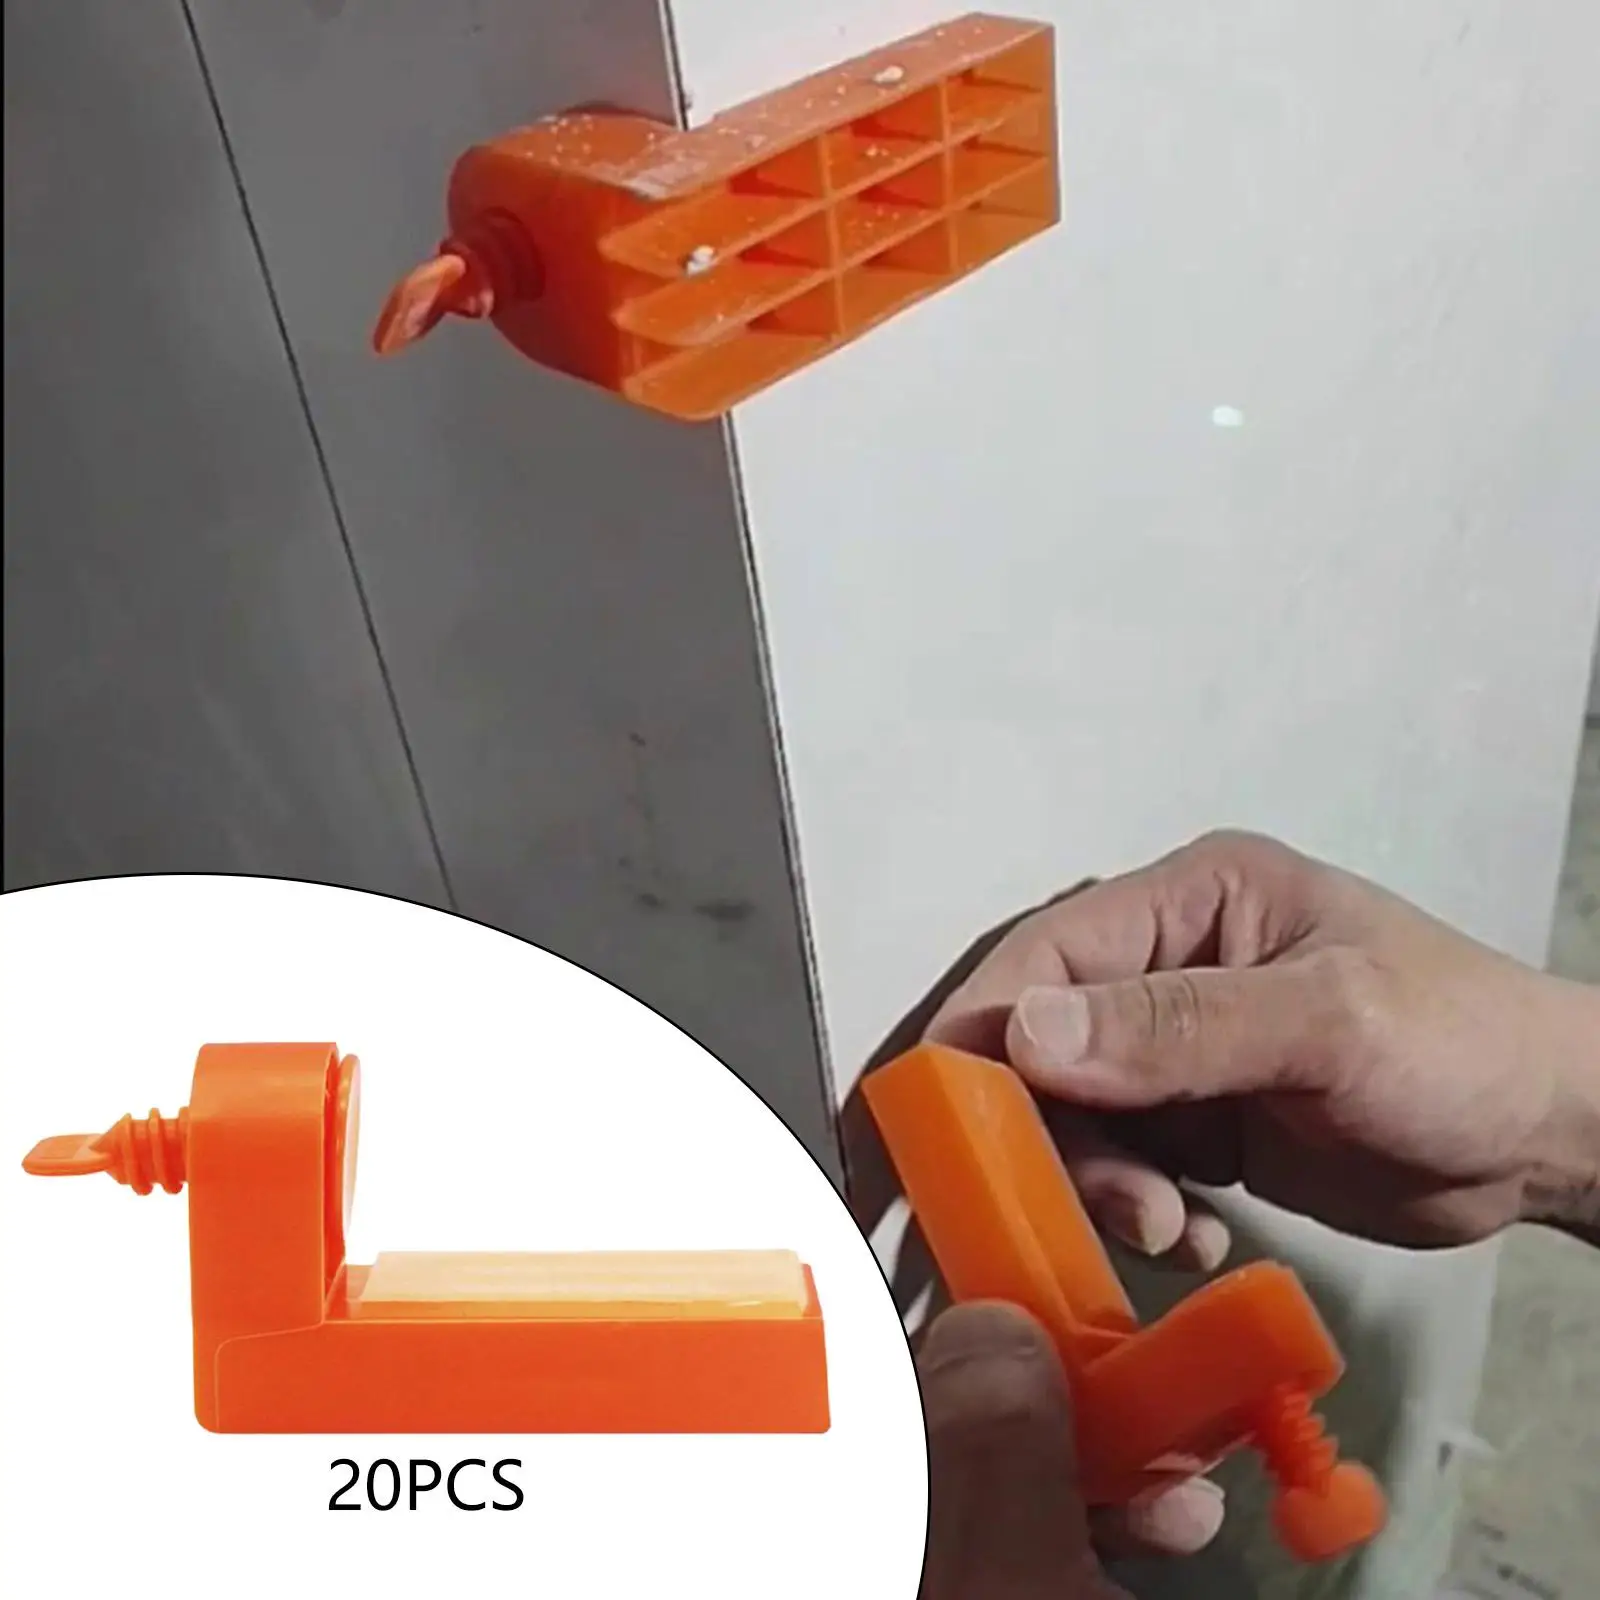 20x Male Angle Leveling Tool Self Leveling Compound Upgraded Wall Ceramic Tile Right Angle Gap Adjustment Tile Leveling System